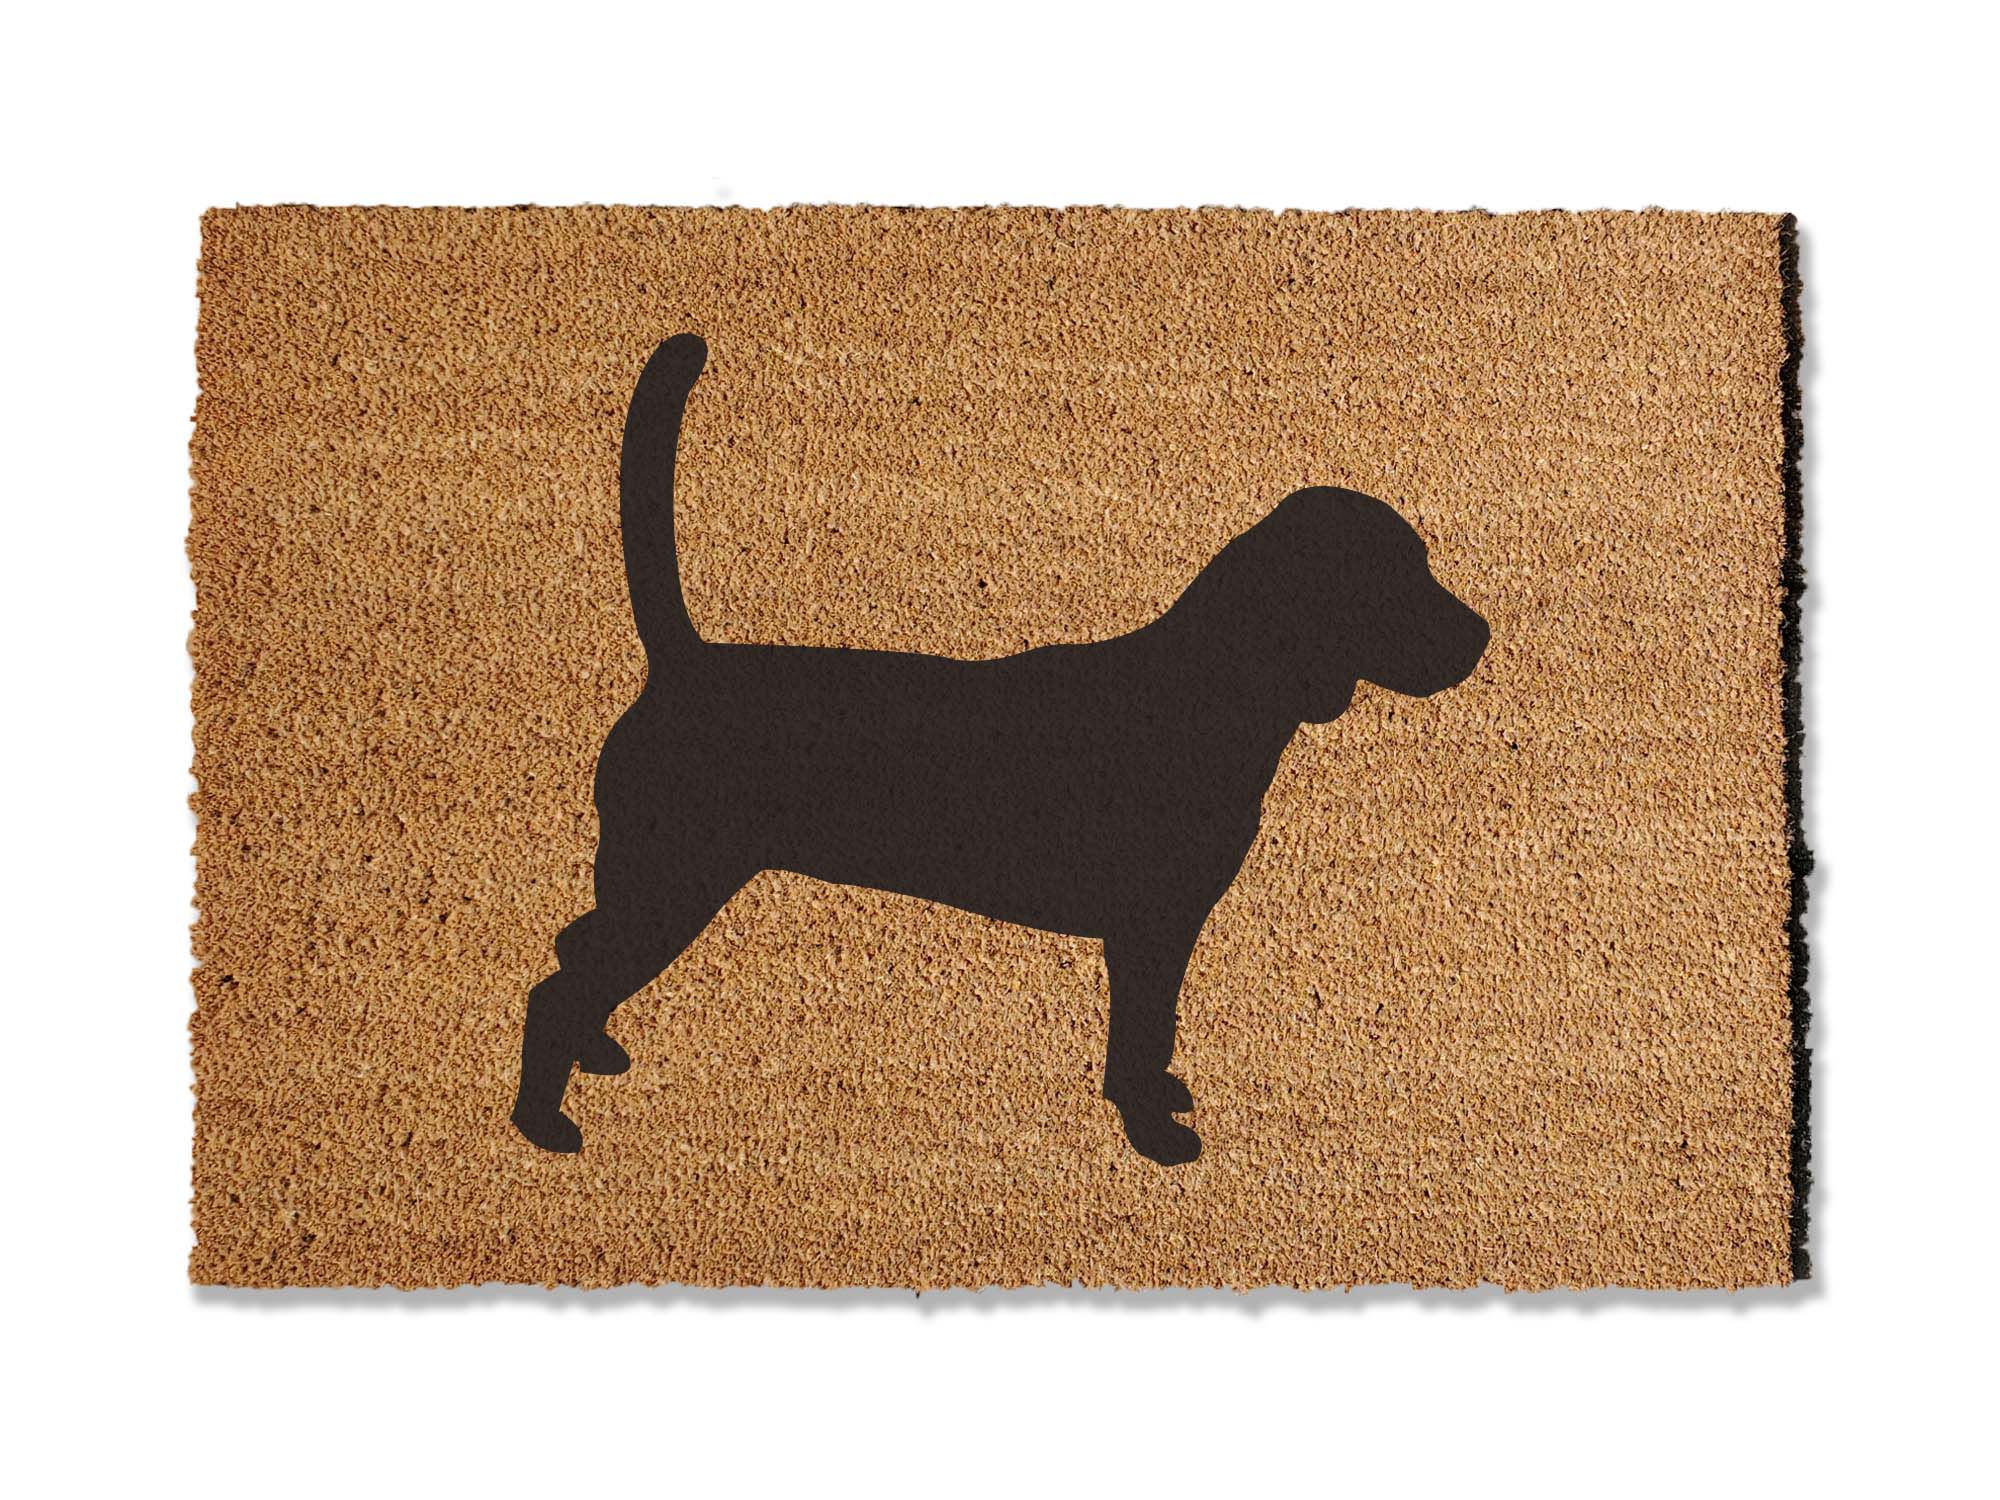 A coir doormat that is 24 inches by 36 inches with the silhouette of a beagle painted on it.